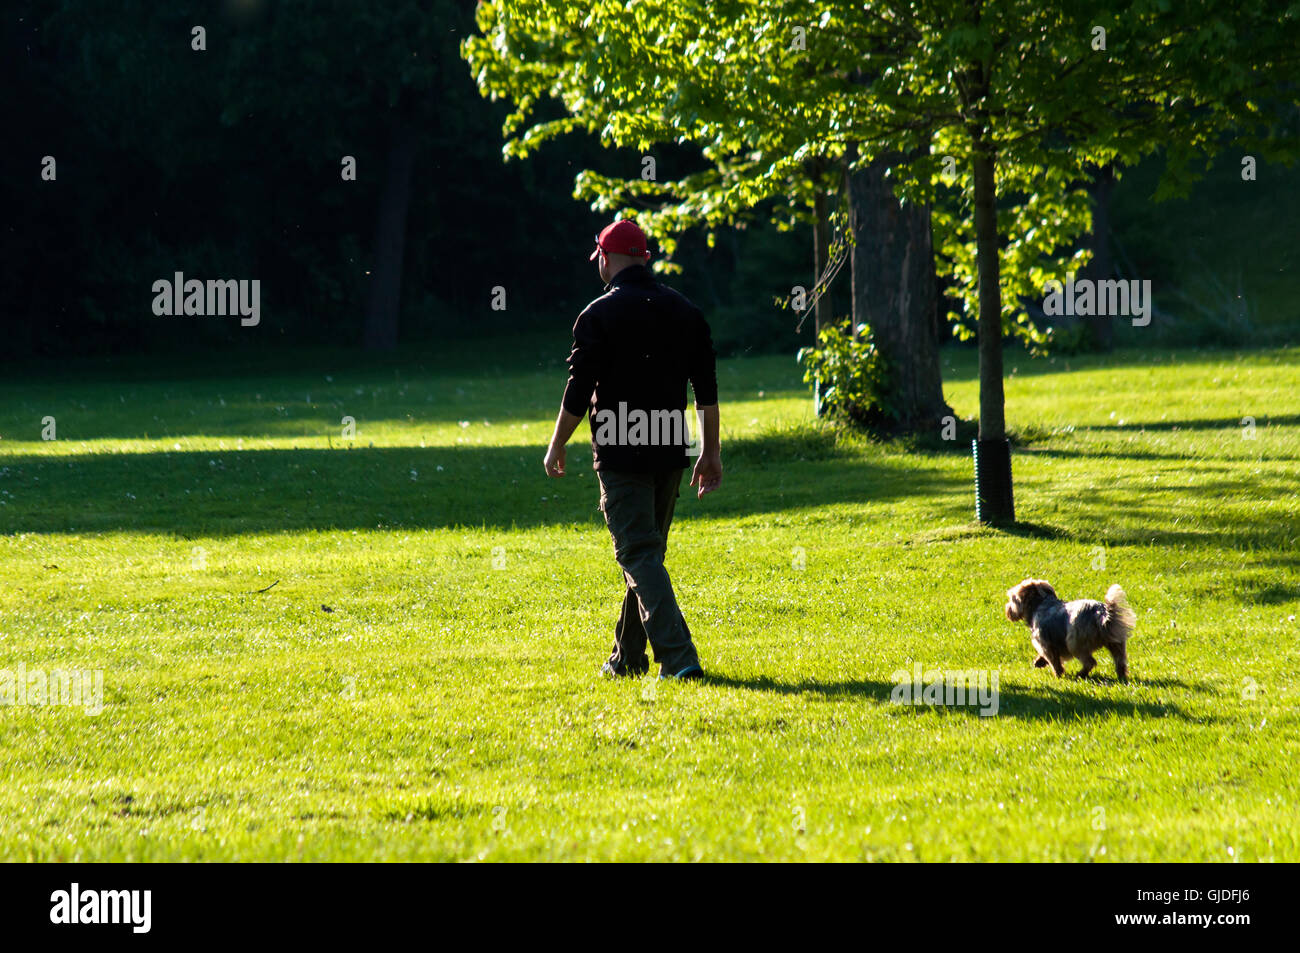 A tall man with a small dog in a park, Ontario, Canada. Out for a walk, Pet. The daily routine. Dog walking. Fresh, green space. Free run. No leash. Stock Photo